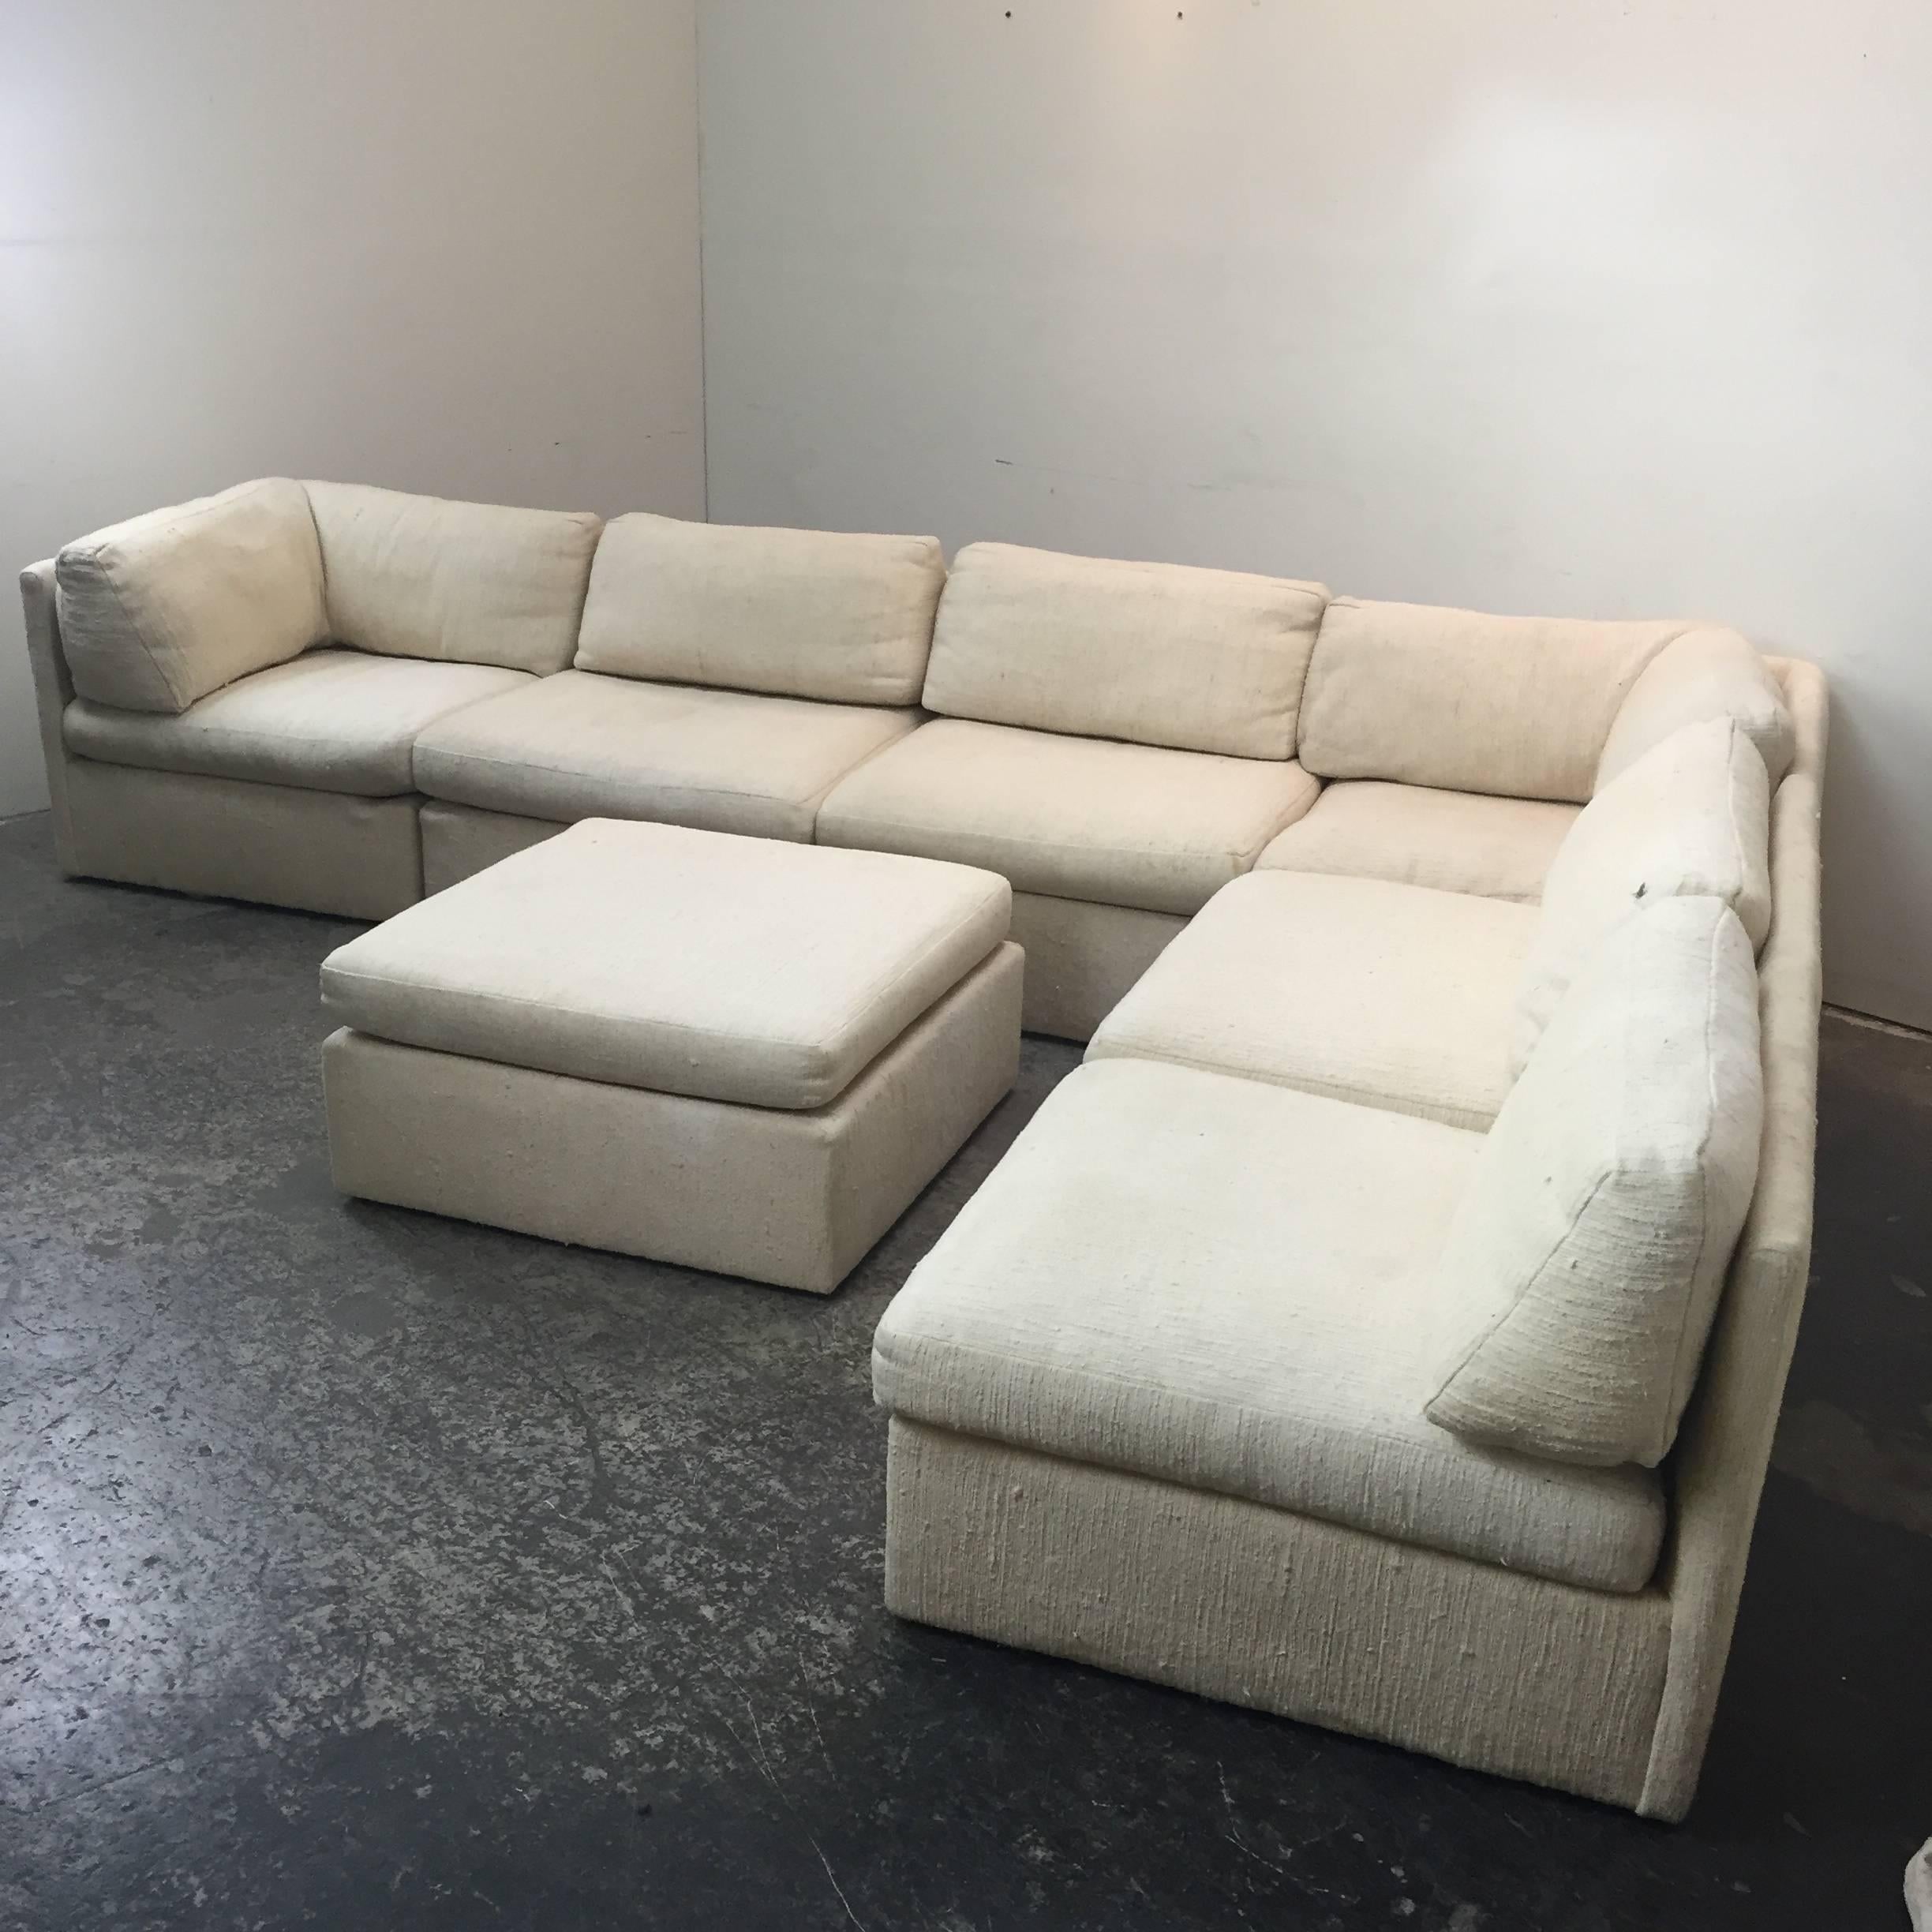 Great form, large and comfortable, this modular Milo Baughman sectional in it's original Haitian cotton fabric can be reconfigured to suit any room. Reupholstery recommended.

Dimensions: 133